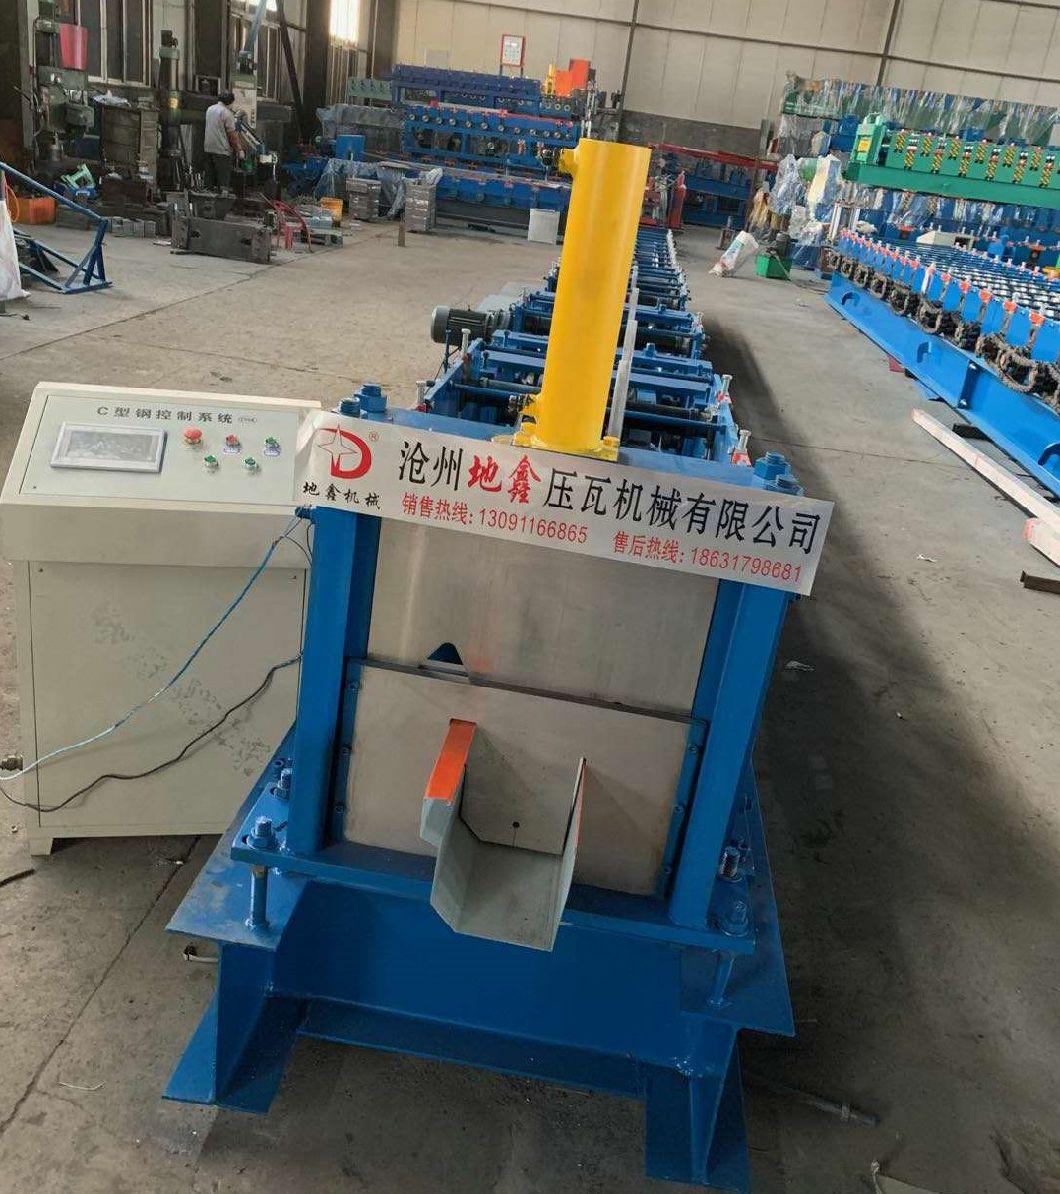 Roll Forming Machines to Make Rain Gutters